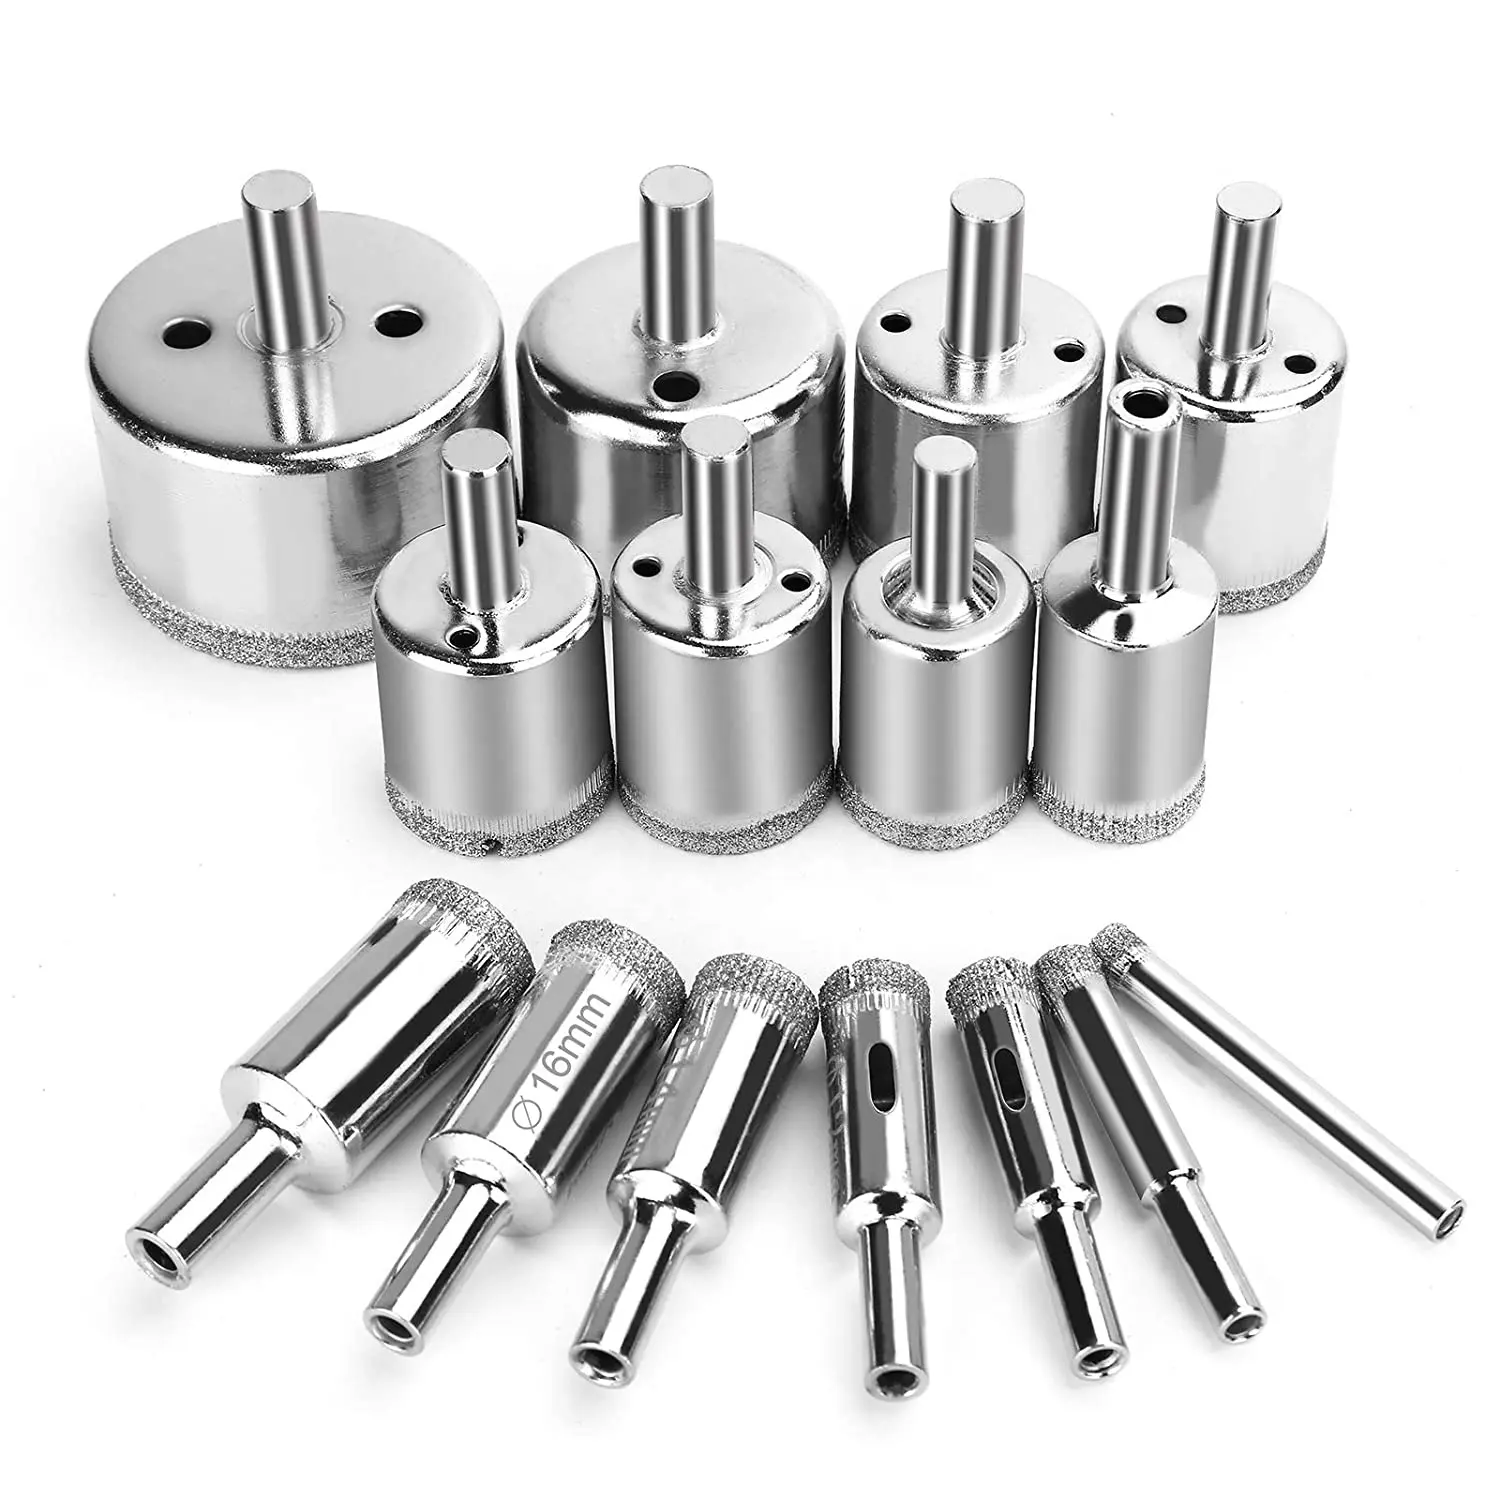 15 Piece Ceramic Diamond Hole saw Bit Set Drilling for Glass/Bottle/Marble/Granite/Tile Cutting 6 mm to 50 mm